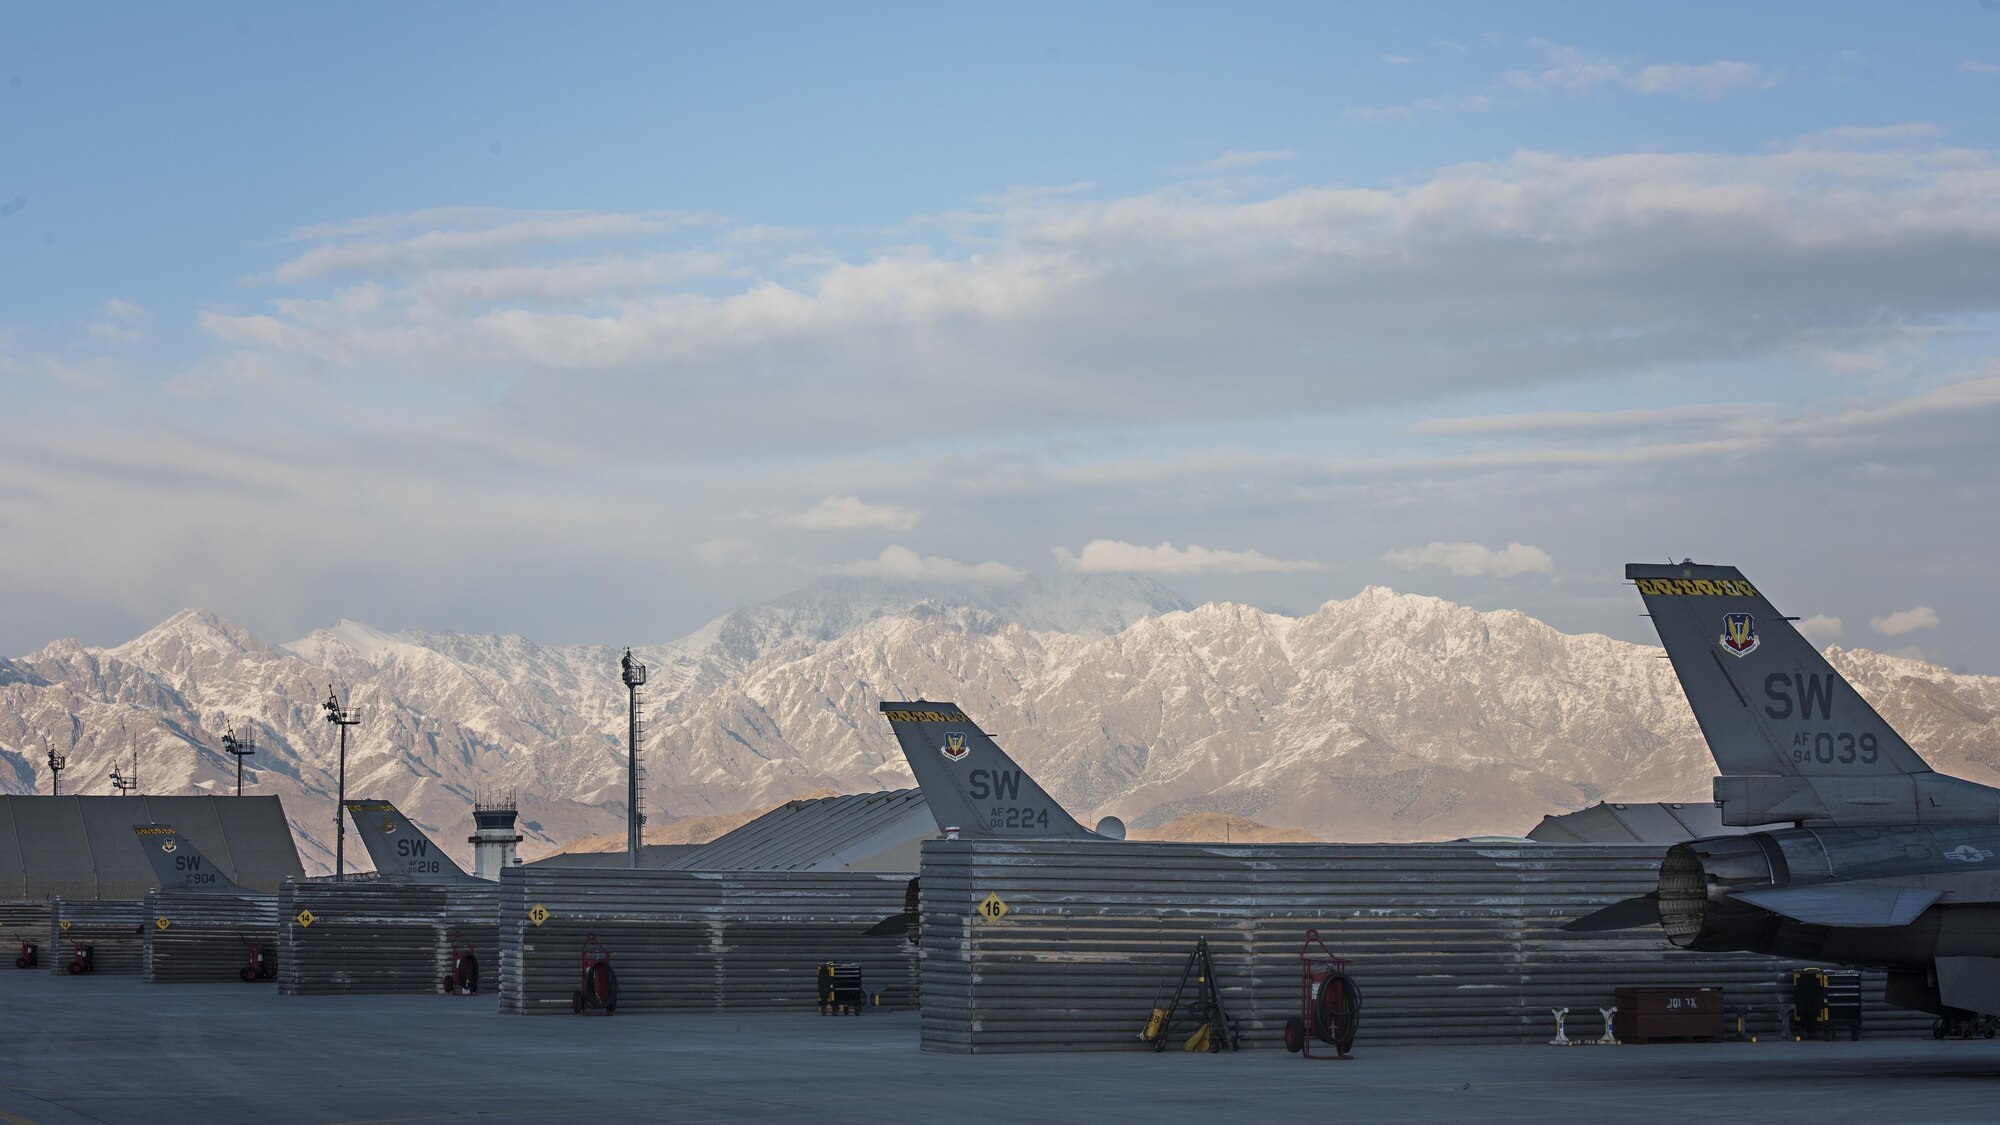 F-16 Fighting Falcons belonging to the 79th Expeditionary Fighter Squadron out of Shaw Air Force Base, South Carolina, sit on the ramp between missions at Bagram Airfield, Afghanistan, Jan. 6, 2017. The fighter squadron here flies multiple sorties daily to support the 455th Air Expeditionary Wing’s mission to defend, support and deliver airpower. (U.S. Air Force photo by Staff Sgt. Katherine Spessa)